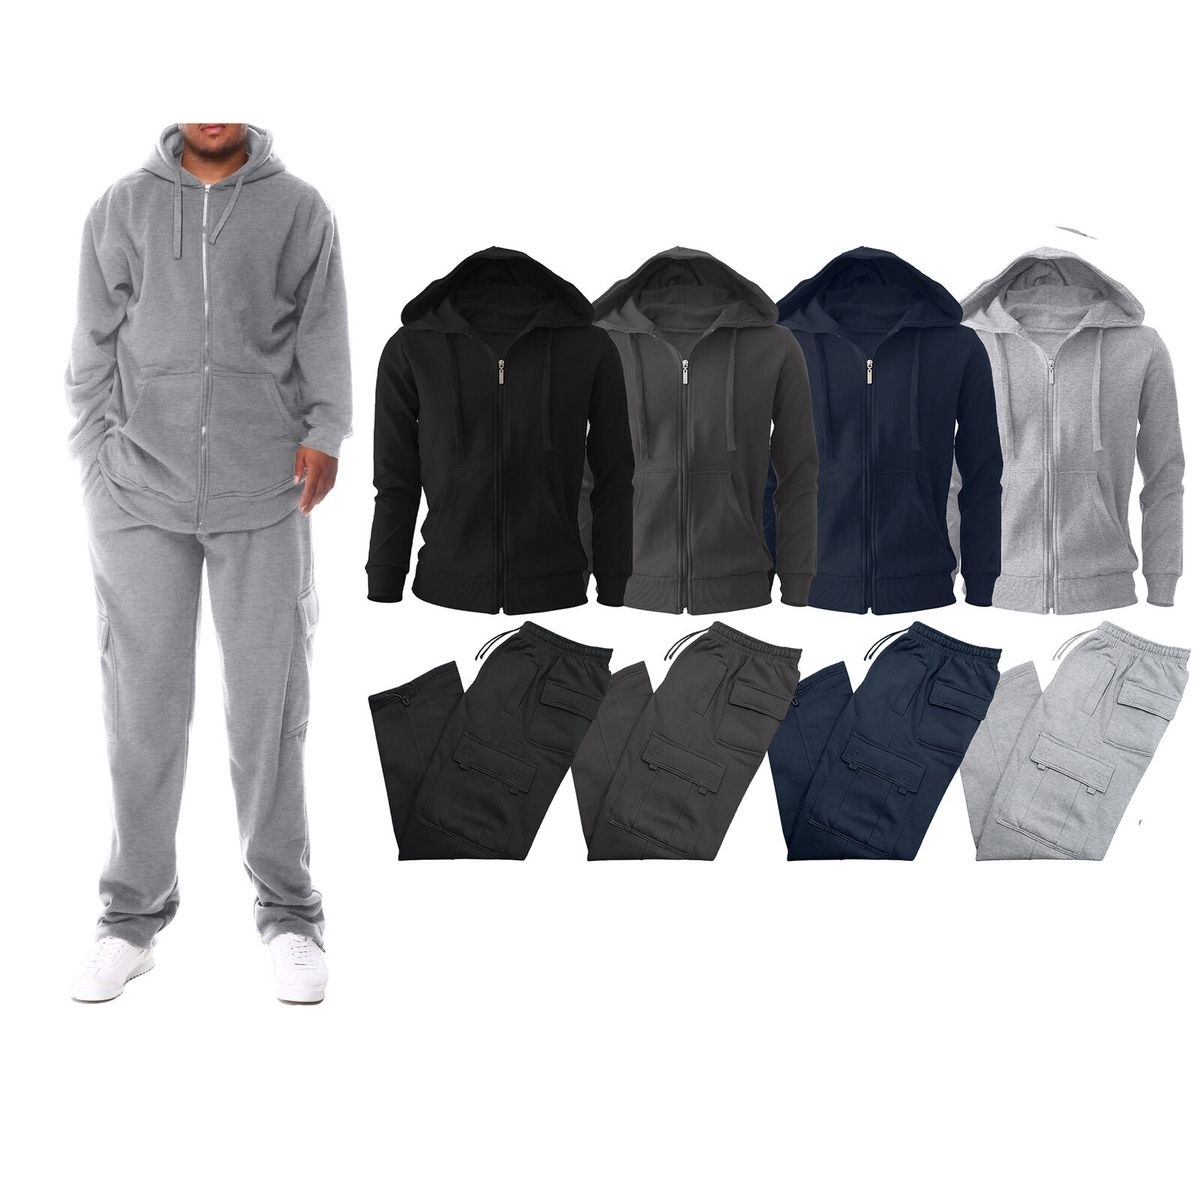 Multi-Pack: Men's Big & Tall Winter Warm Athletic Active Cozy Fleece Lined Multi-Pocket Full Zip Up Cargo Tracksuit - Charcoal, 1-pack, Larg